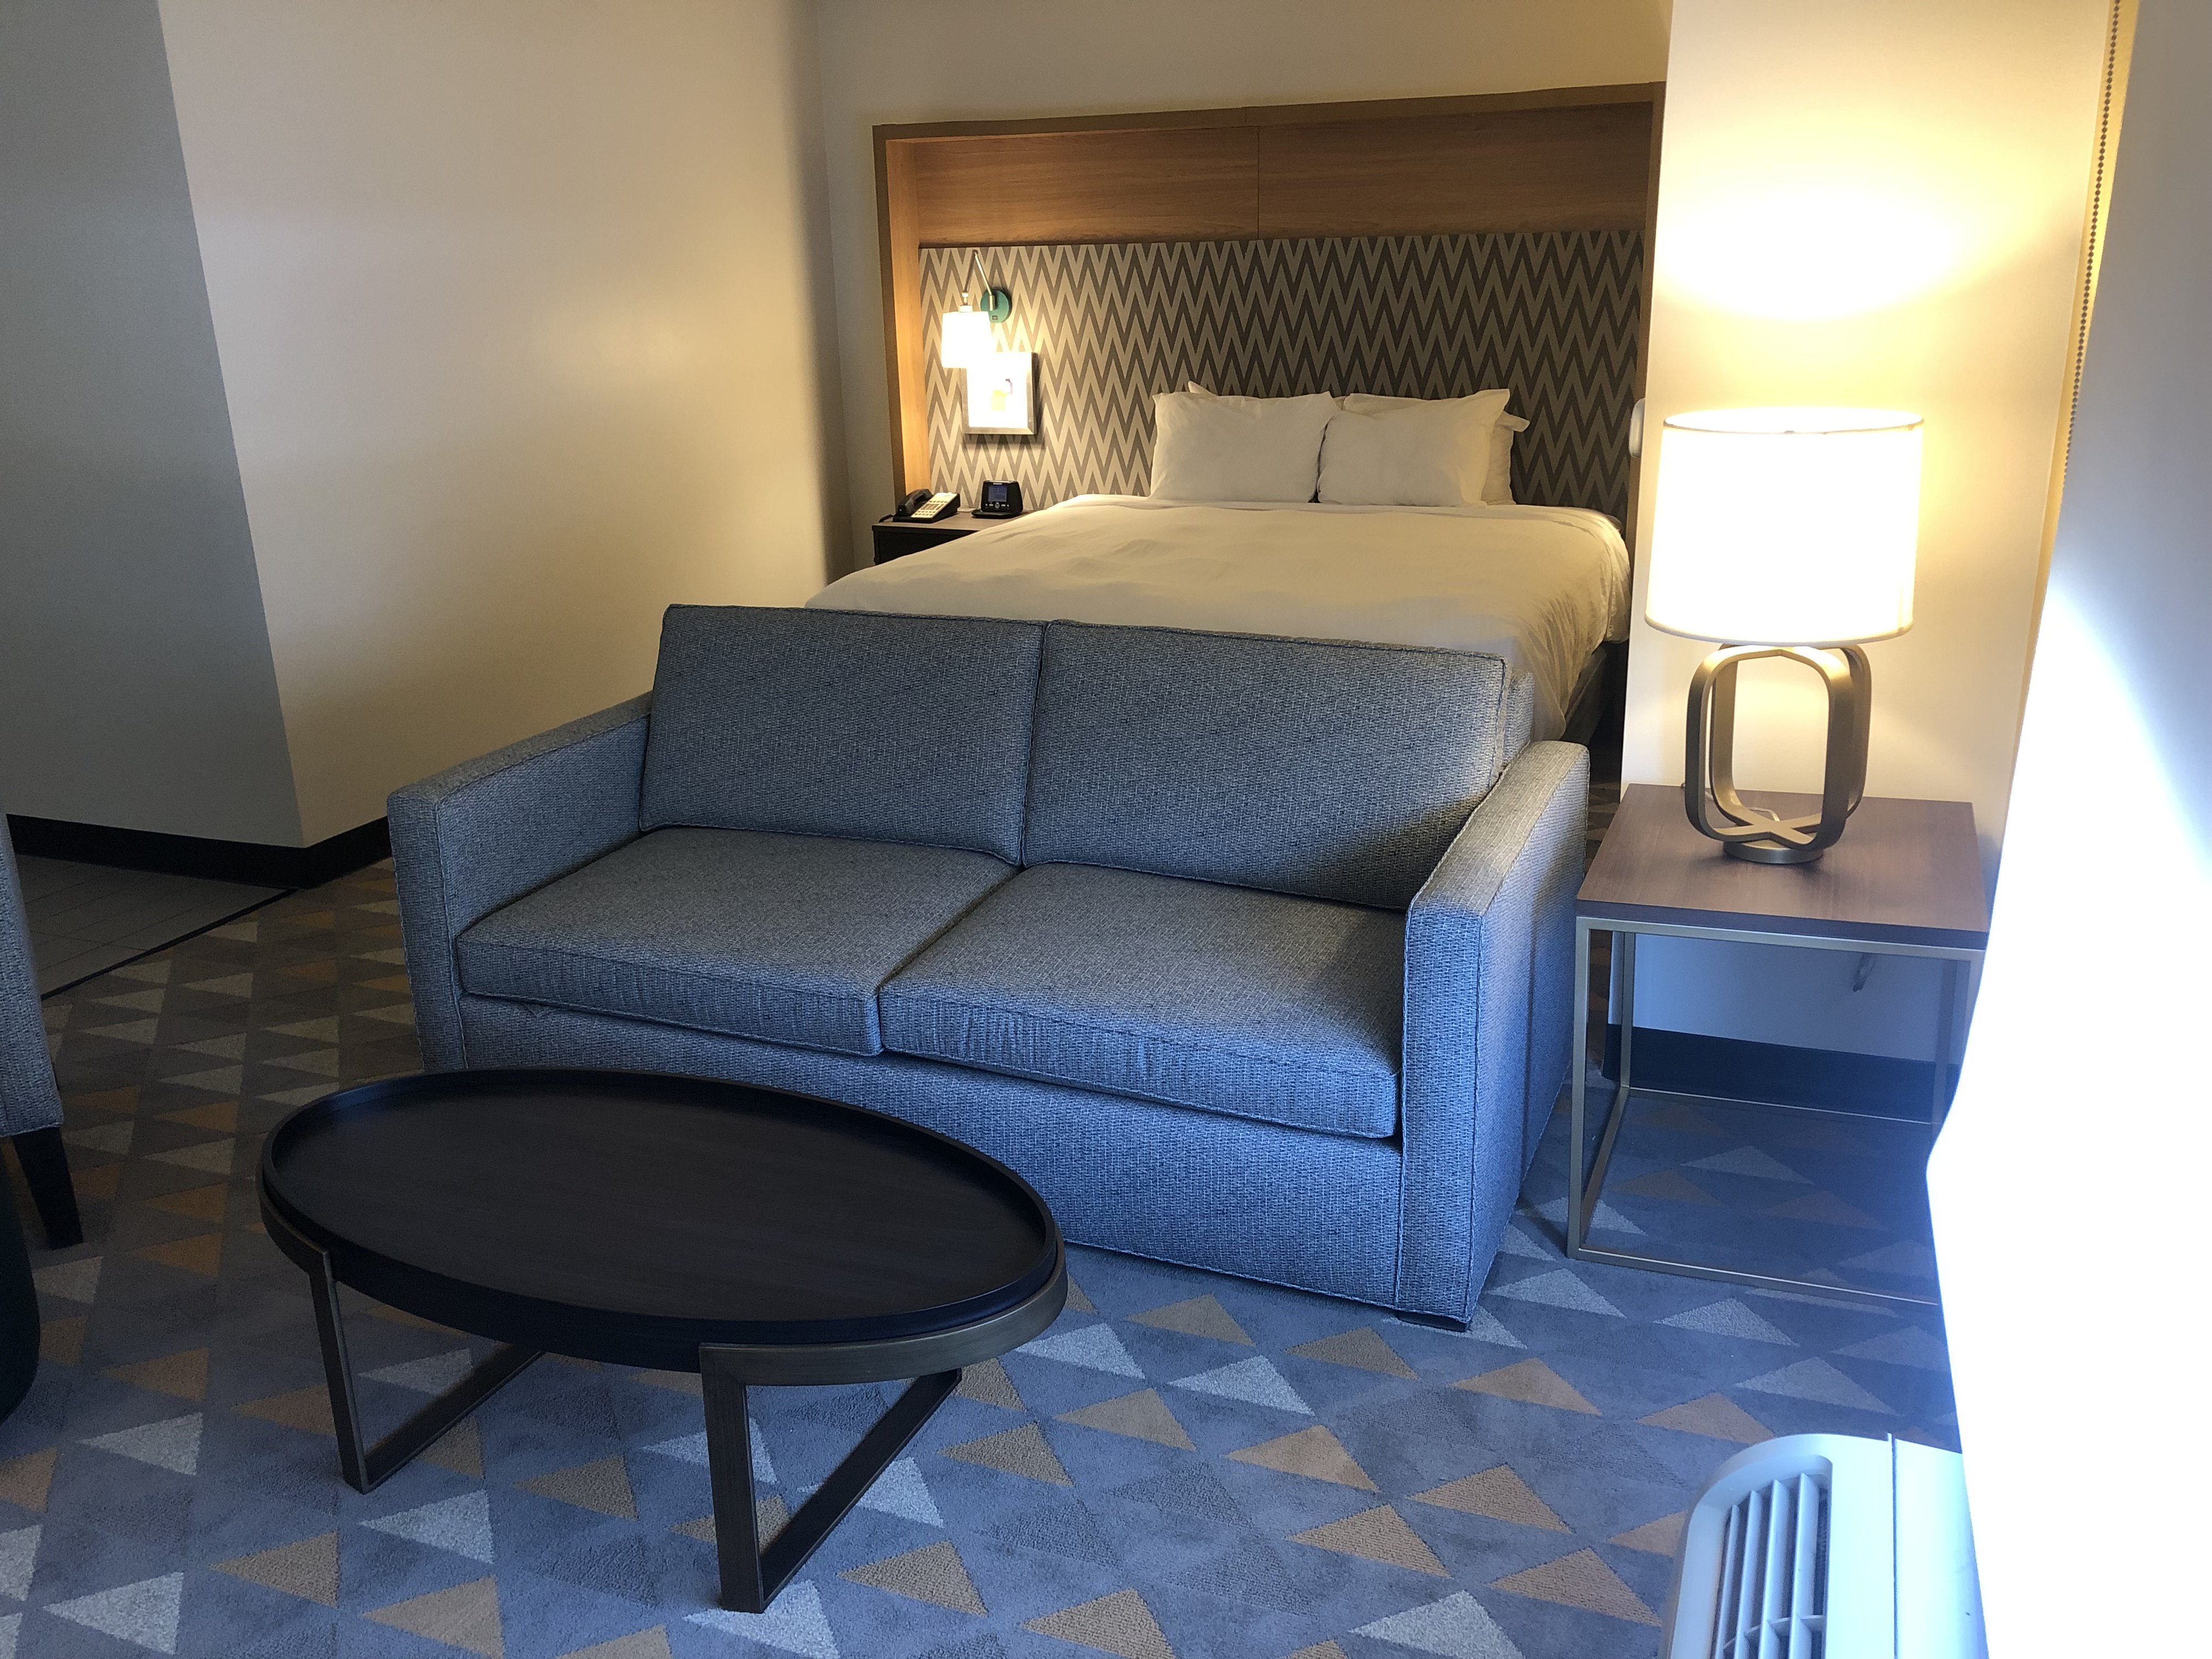 Make yourself at home in our King with sleeper sofa guest rooms.